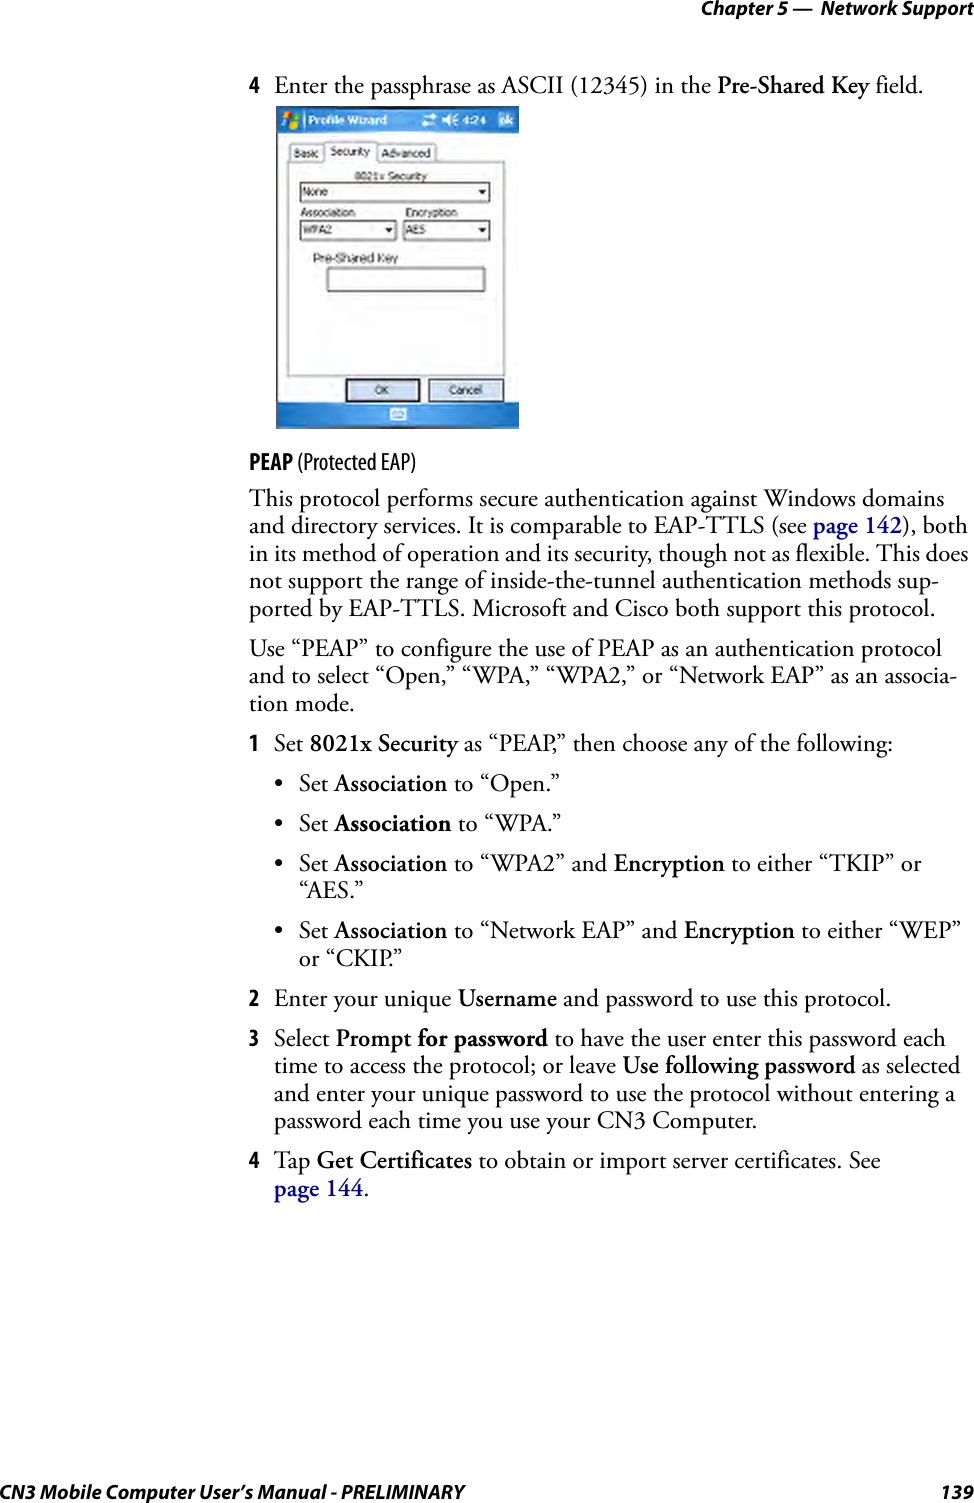 Chapter 5 —  Network SupportCN3 Mobile Computer User’s Manual - PRELIMINARY 1394Enter the passphrase as ASCII (12345) in the Pre-Shared Key field.PEAP (Protected EAP)This protocol performs secure authentication against Windows domains and directory services. It is comparable to EAP-TTLS (see page 142), both in its method of operation and its security, though not as flexible. This does not support the range of inside-the-tunnel authentication methods sup-ported by EAP-TTLS. Microsoft and Cisco both support this protocol.Use “PEAP” to configure the use of PEAP as an authentication protocol and to select “Open,” “WPA,” “WPA2,” or “Network EAP” as an associa-tion mode.1Set 8021x Security as “PEAP,” then choose any of the following:•Set Association to “Open.”•Set Association to “WPA.”•Set Association to “WPA2” and Encryption to either “TKIP” or “AES.”•Set Association to “Network EAP” and Encryption to either “WEP” or “CKIP.”2Enter your unique Username and password to use this protocol.3Select Prompt for password to have the user enter this password each time to access the protocol; or leave Use following password as selected and enter your unique password to use the protocol without entering a password each time you use your CN3 Computer.4Tap  Get Certificates to obtain or import server certificates. See page 144.